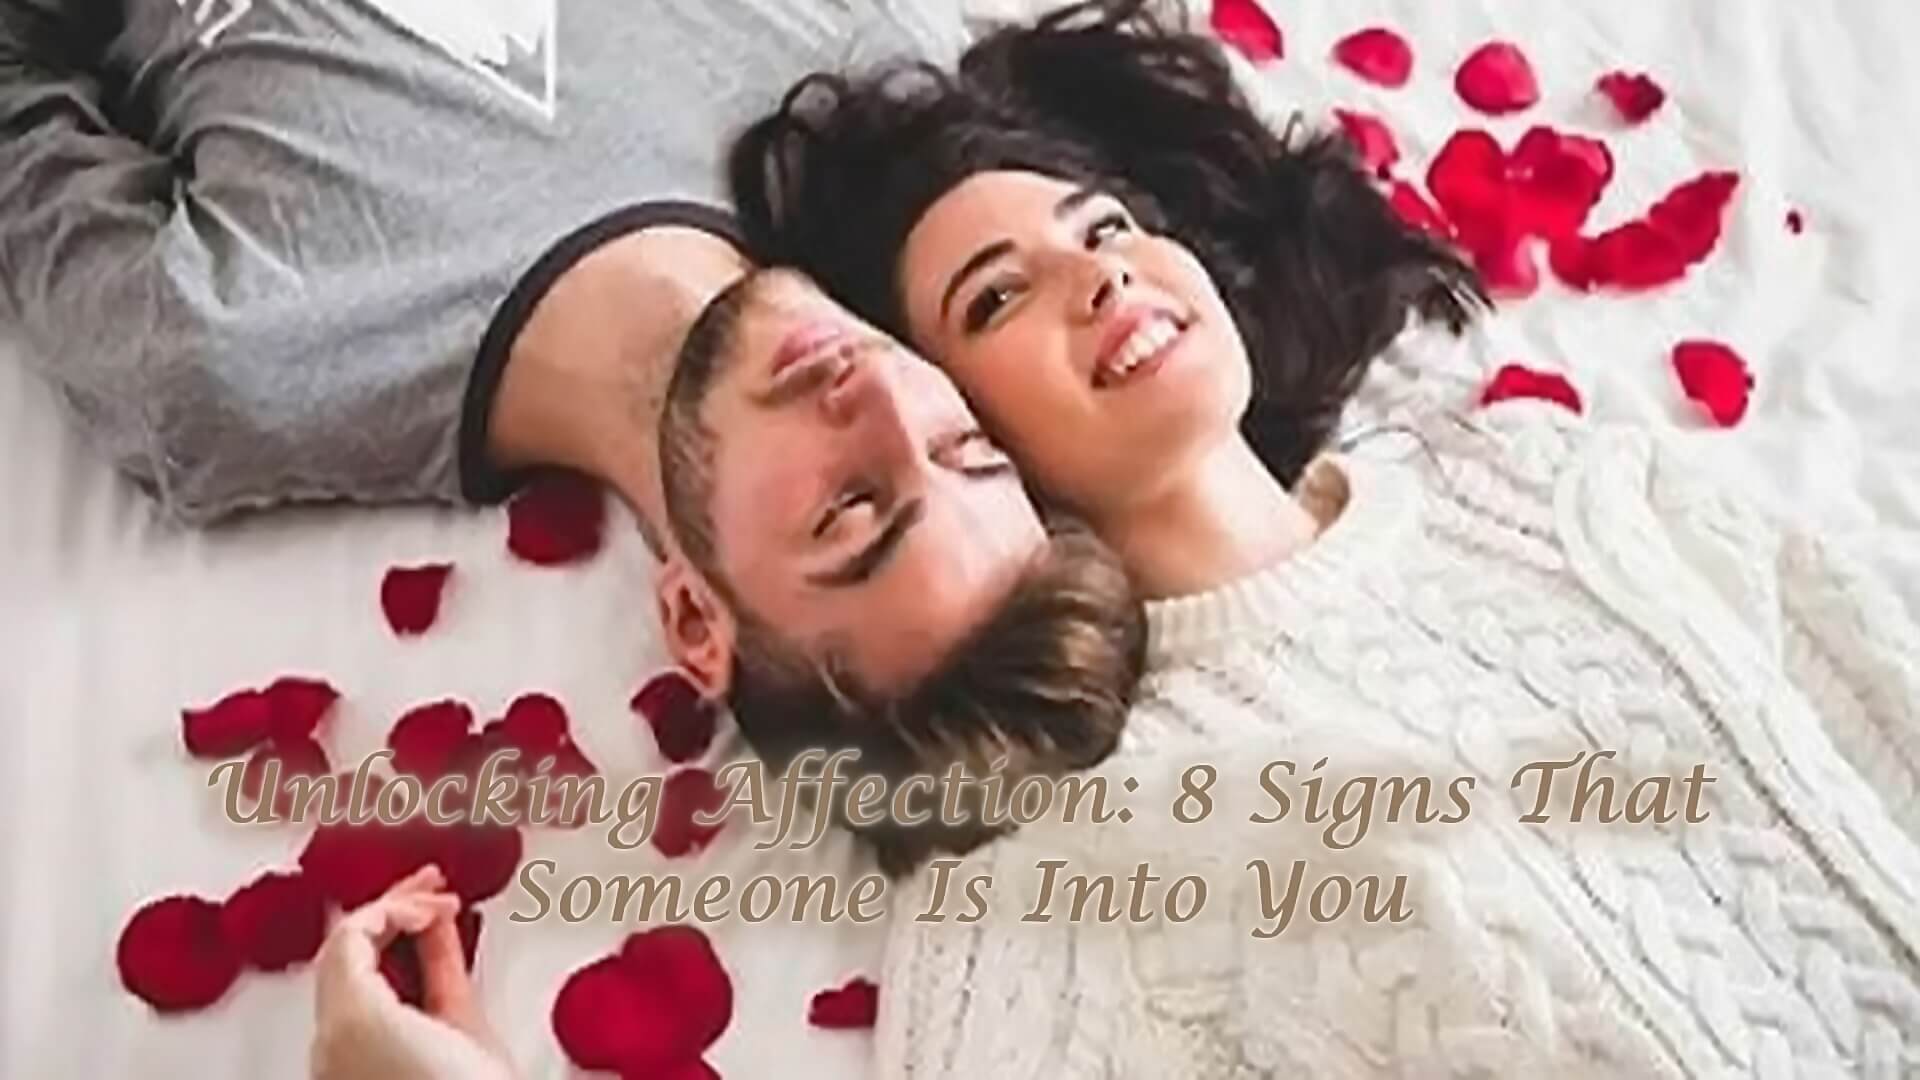 Unlocking Affection: 8 Signs That Someone Is Into You